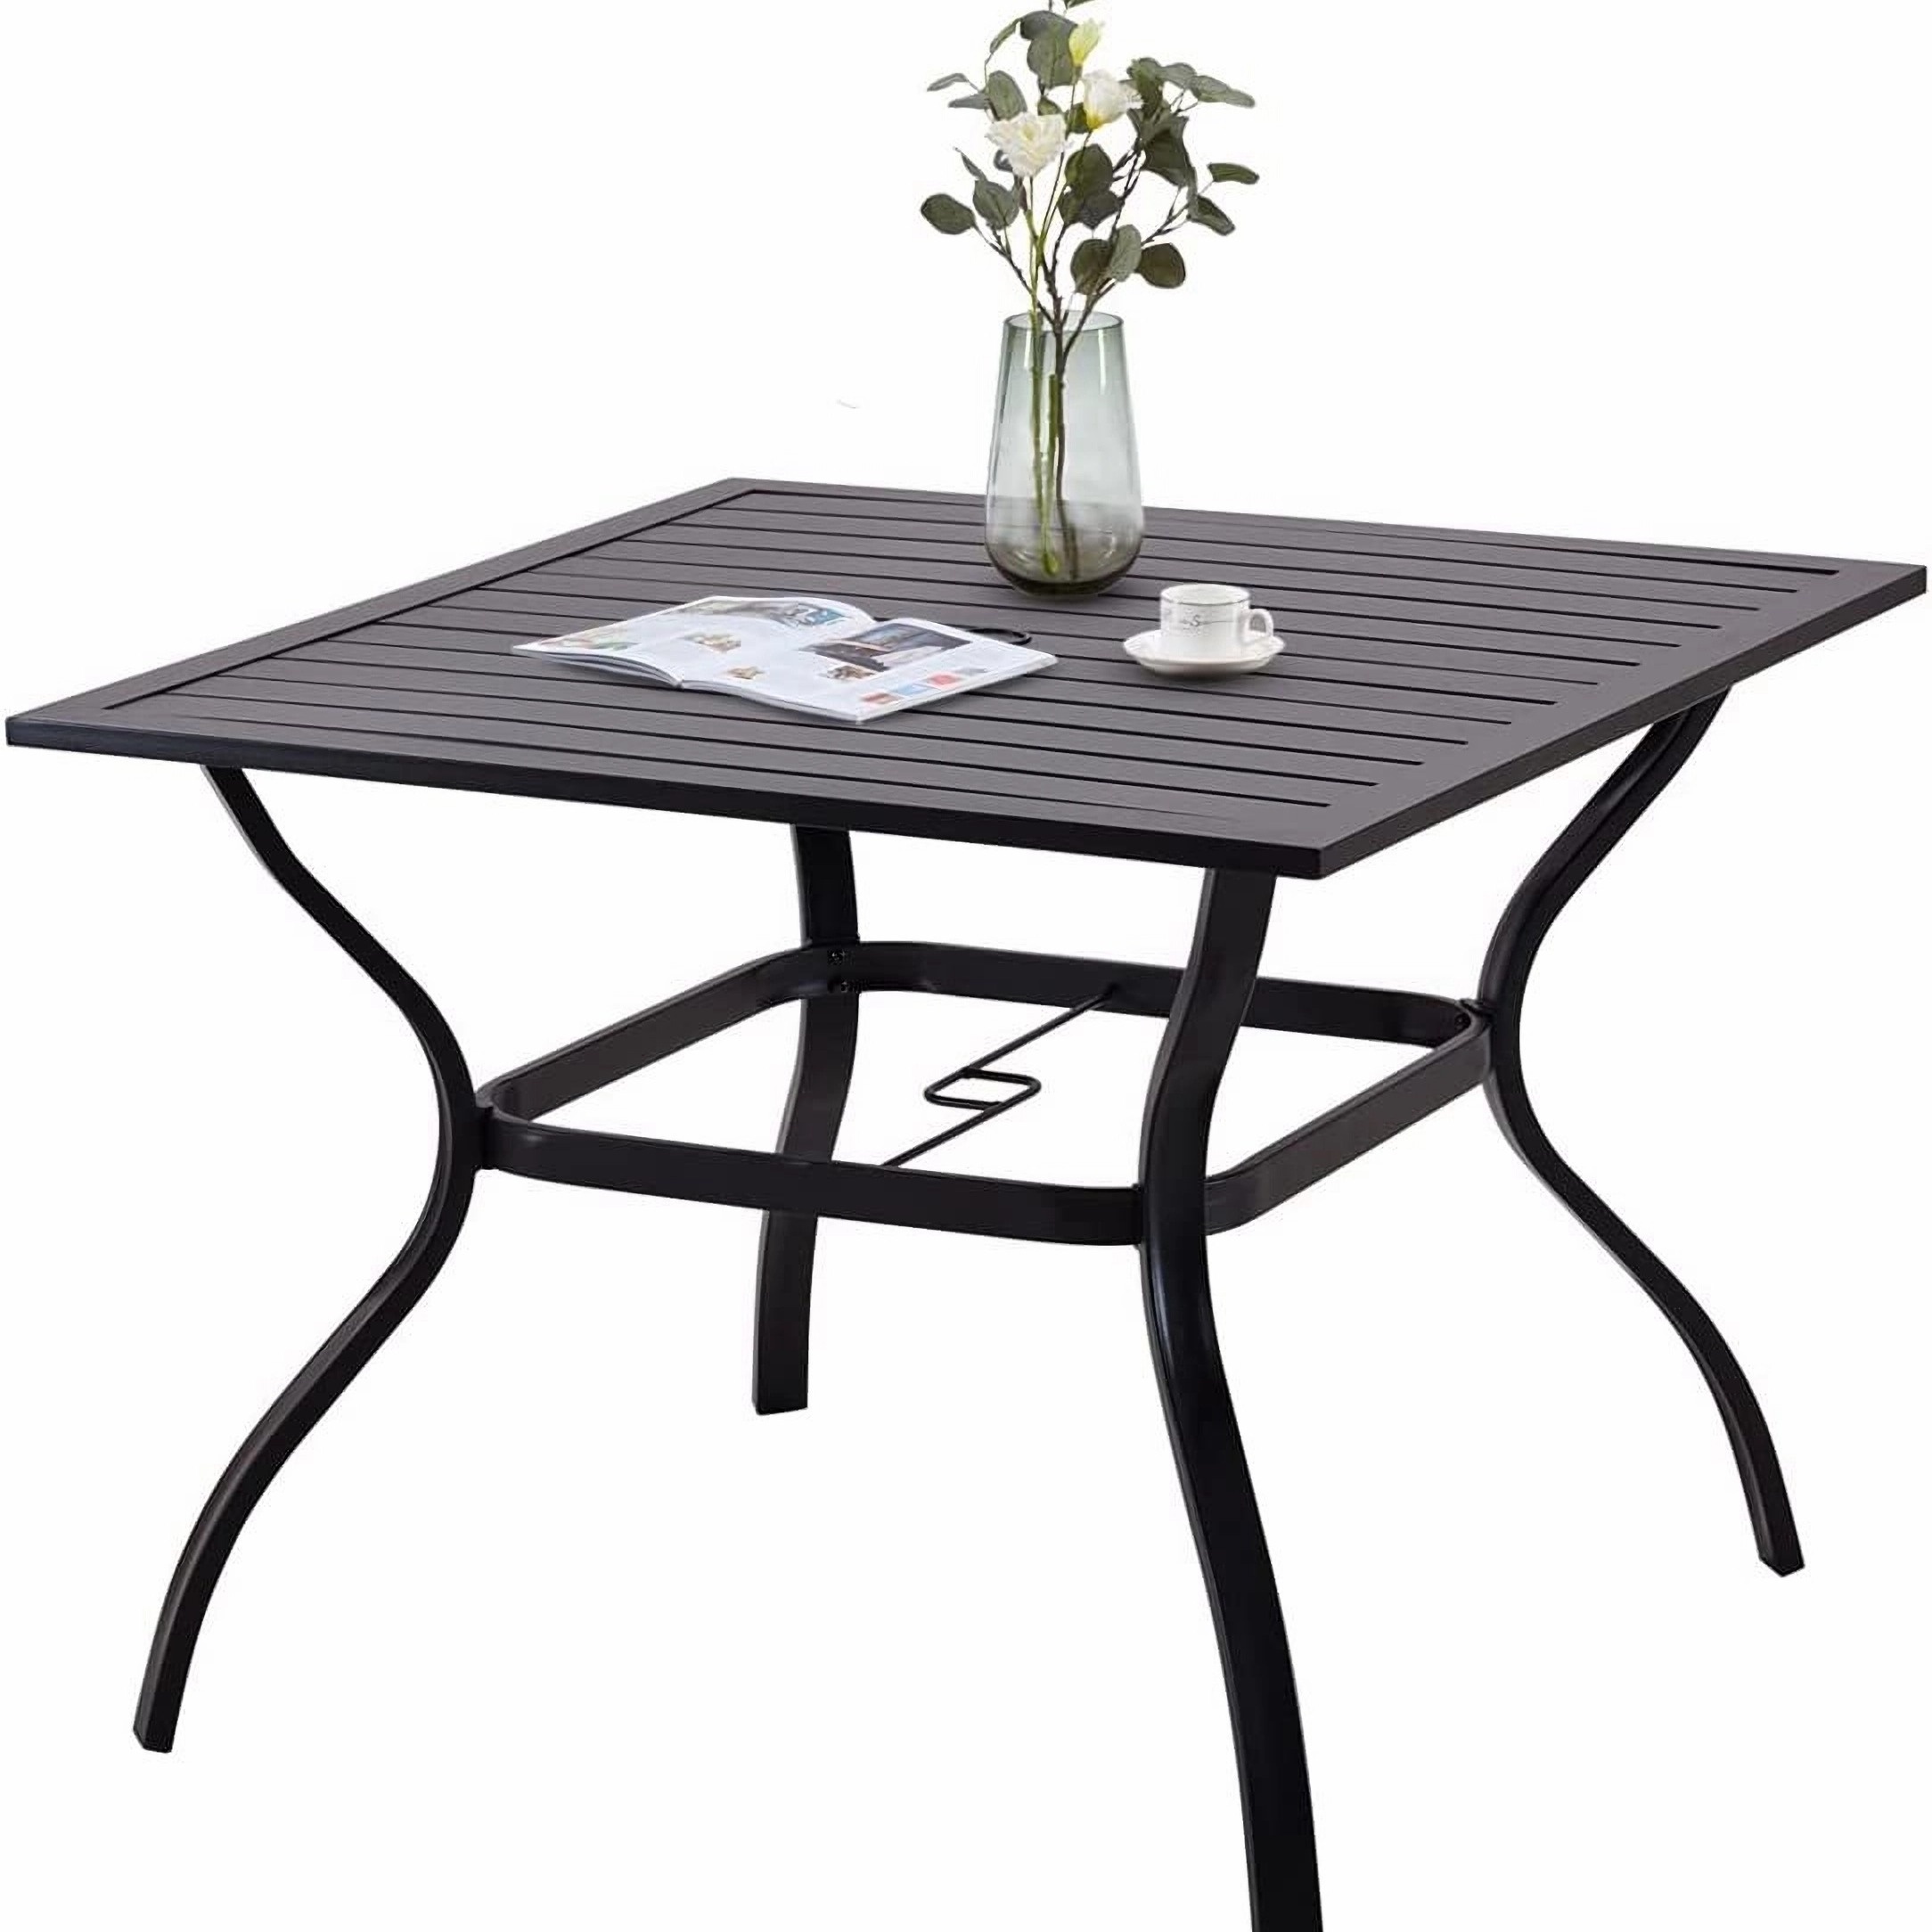 

Farini 37 Inch Metal Patio Table With 1.57" Umbrella Hole, Square Outdoor Dining Table Black